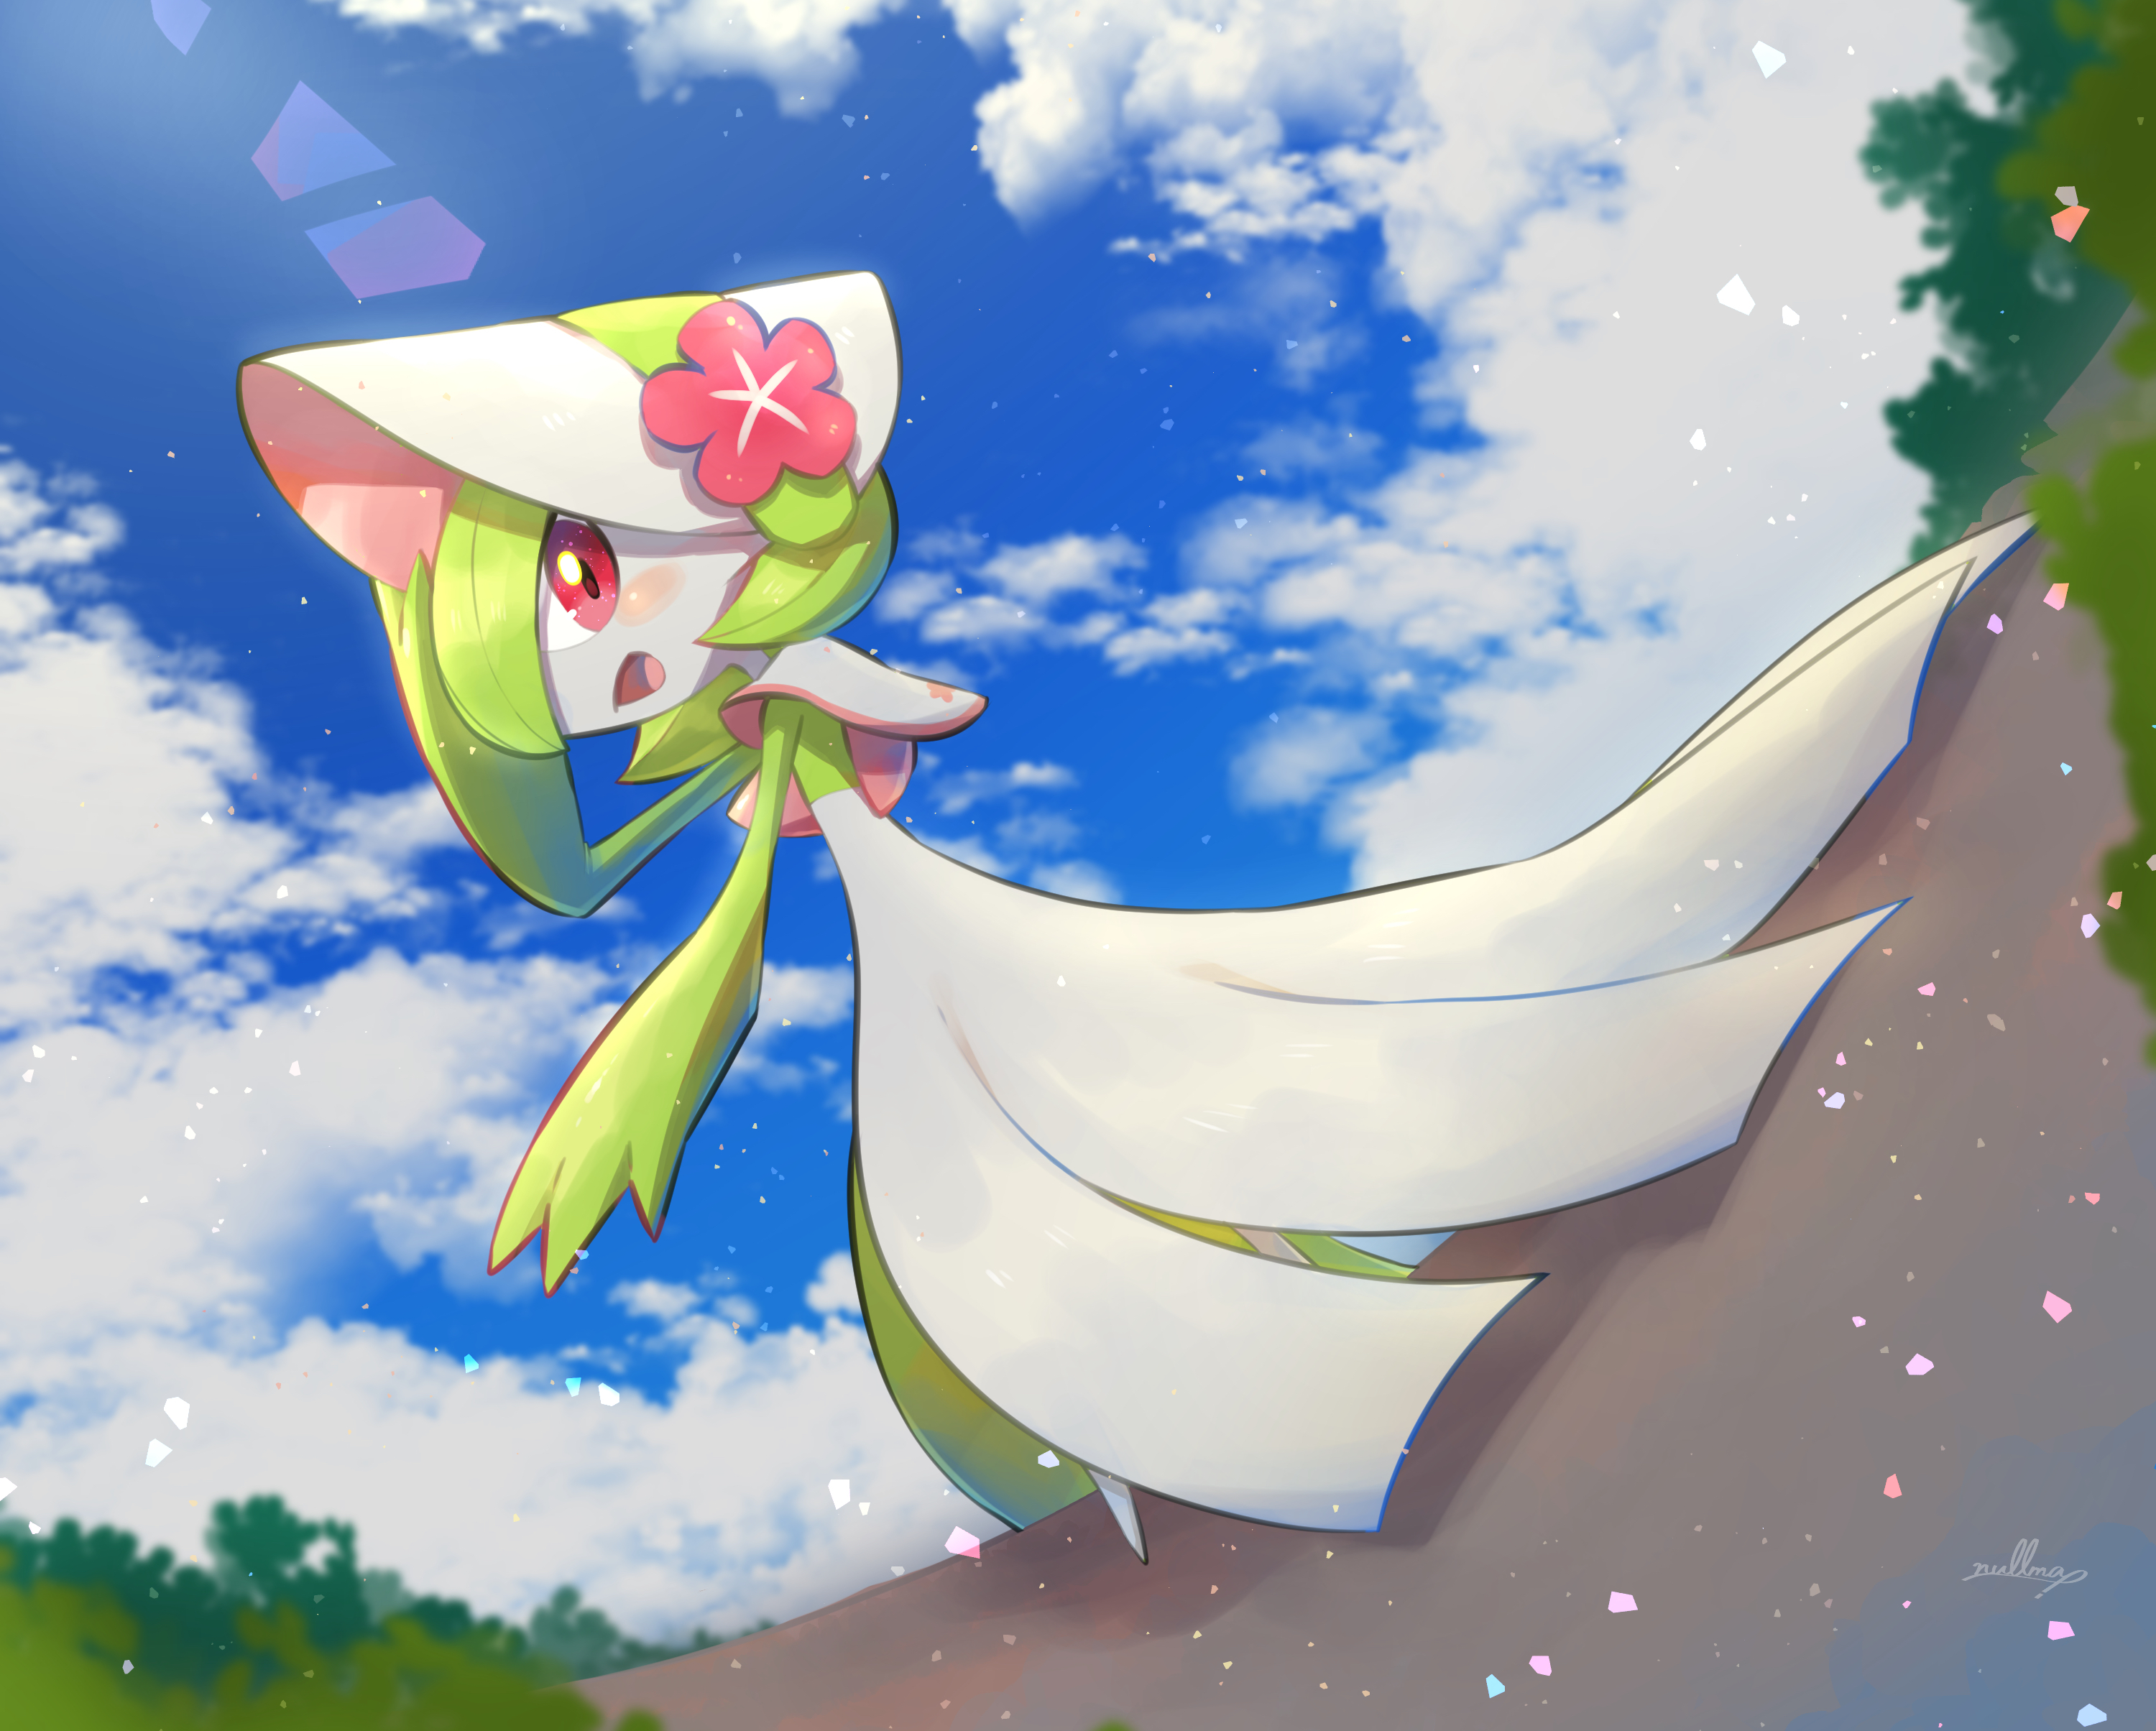 __gardevoir_and_gardevoir_pokemon_and_1_more_drawn_by_nullma__fc6e7f359952fb544dc0413053503a57.jpg